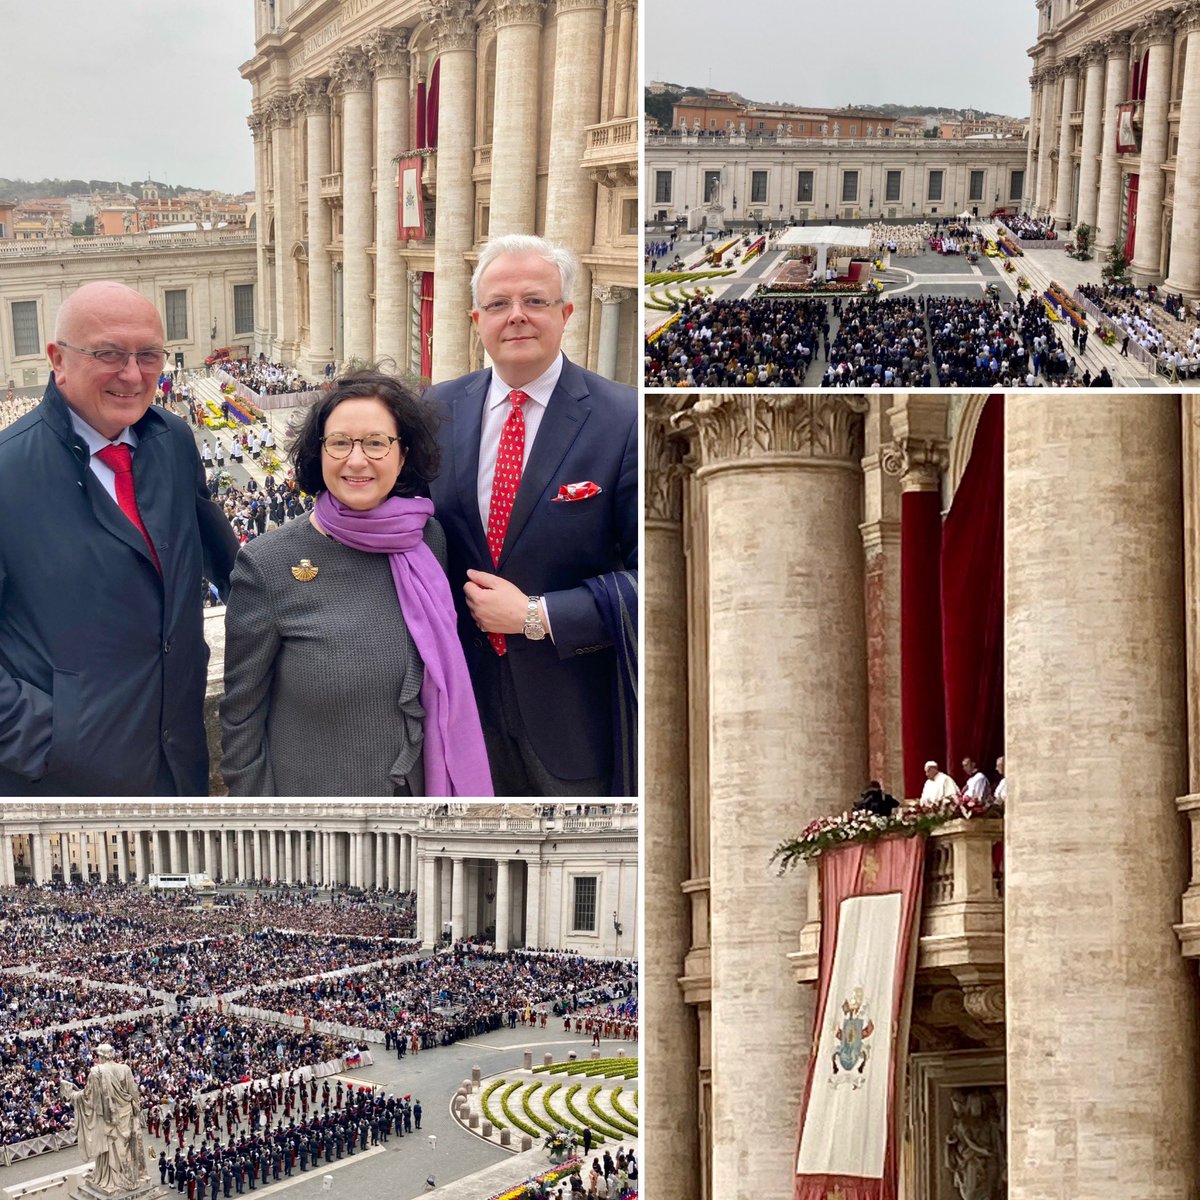 Attending the #Easter Peace Message by Pope #Francis and the Benedizione Urbi et Orbi 🇱🇺🇻🇦Schein #Ouschteren Buona #Pasqua2024 Joyeuses #Paques #EasterSunday #Ouschteren2024 #happyeaster2024 #LUtoHolySee